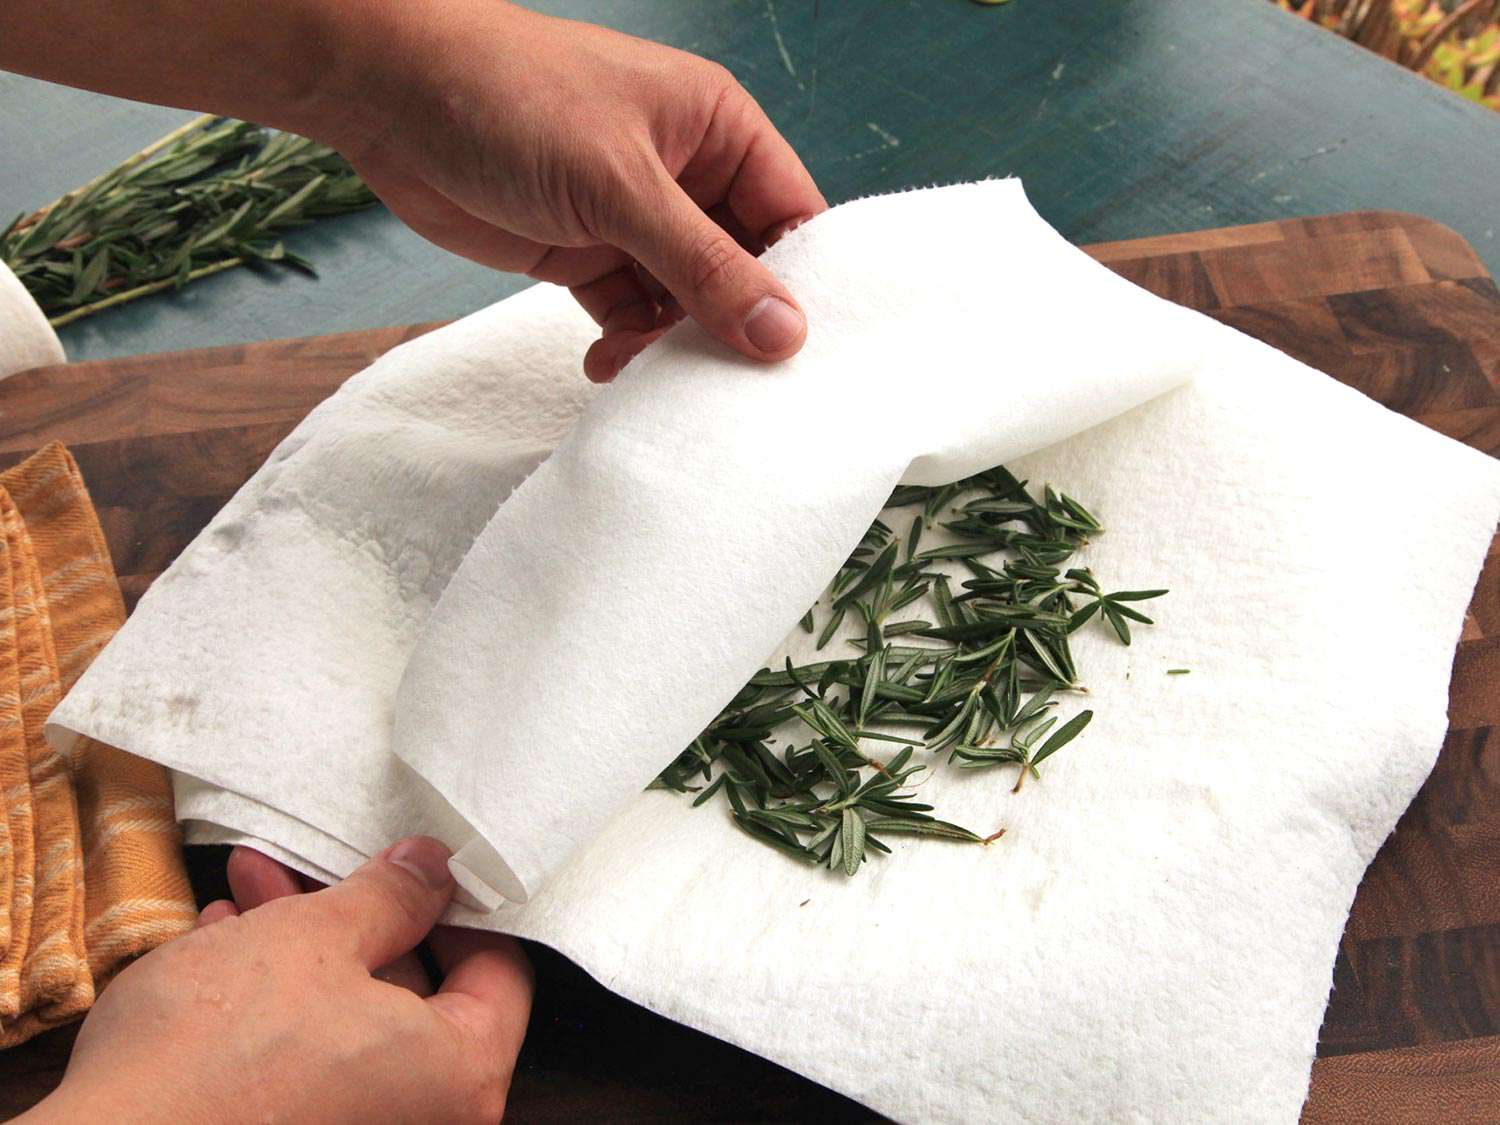 How To Dry Rosemary In Microwave